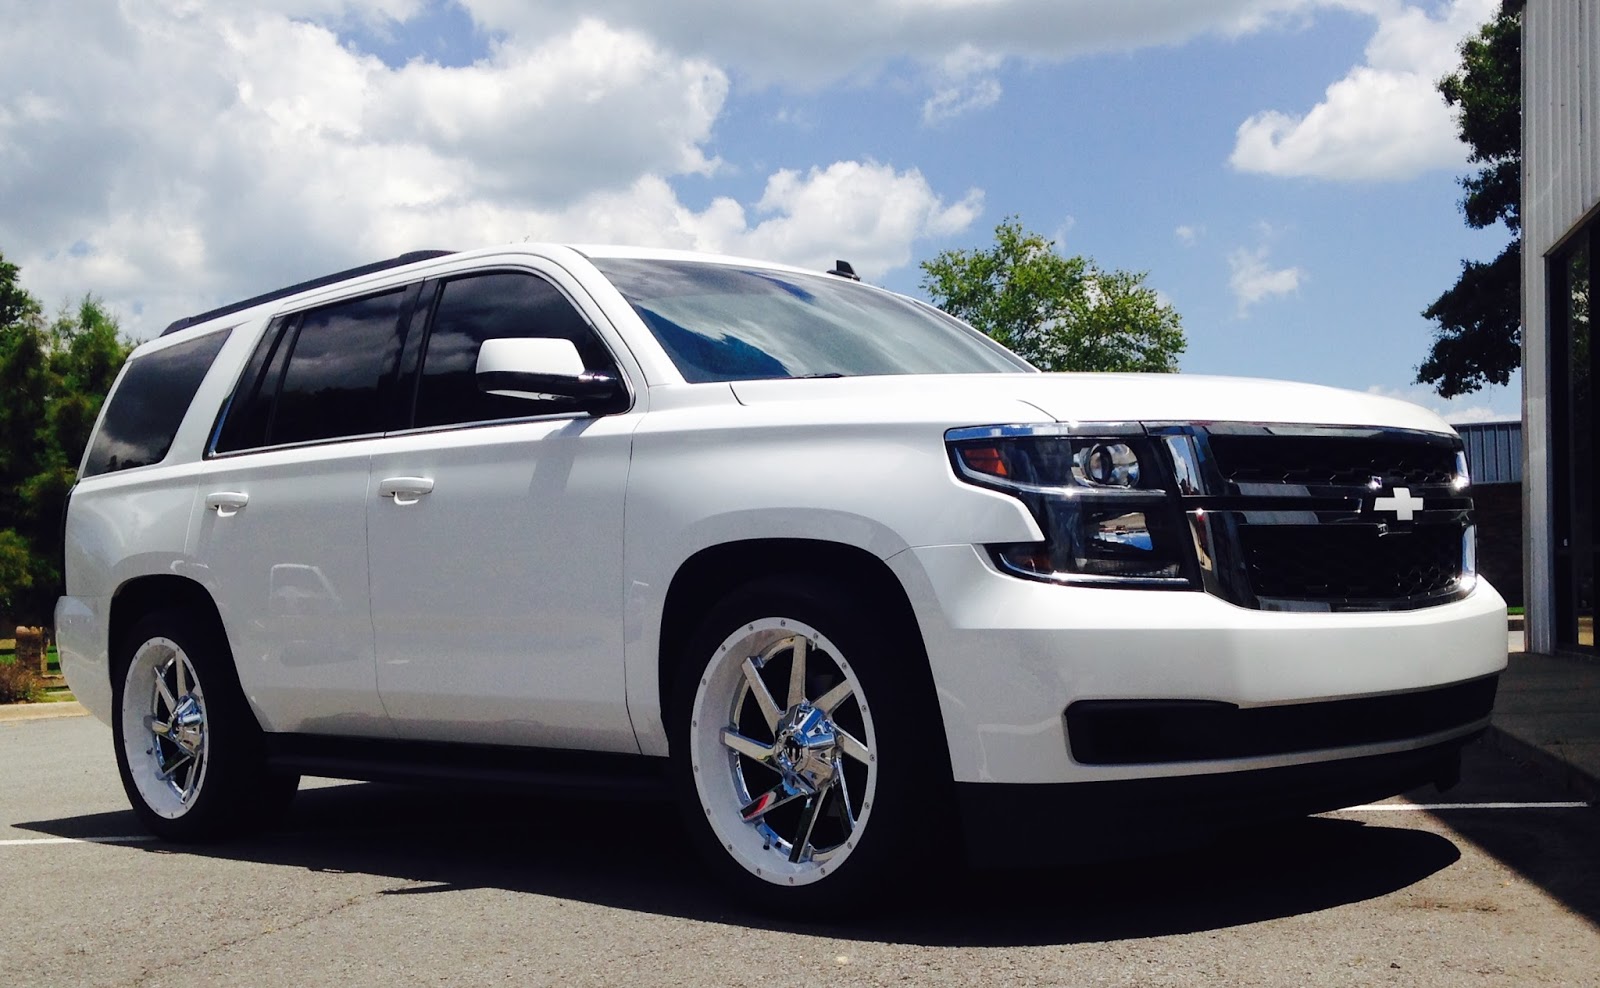 2015 Chevrolet Tahoe lowered on McGaughy's Suspension.